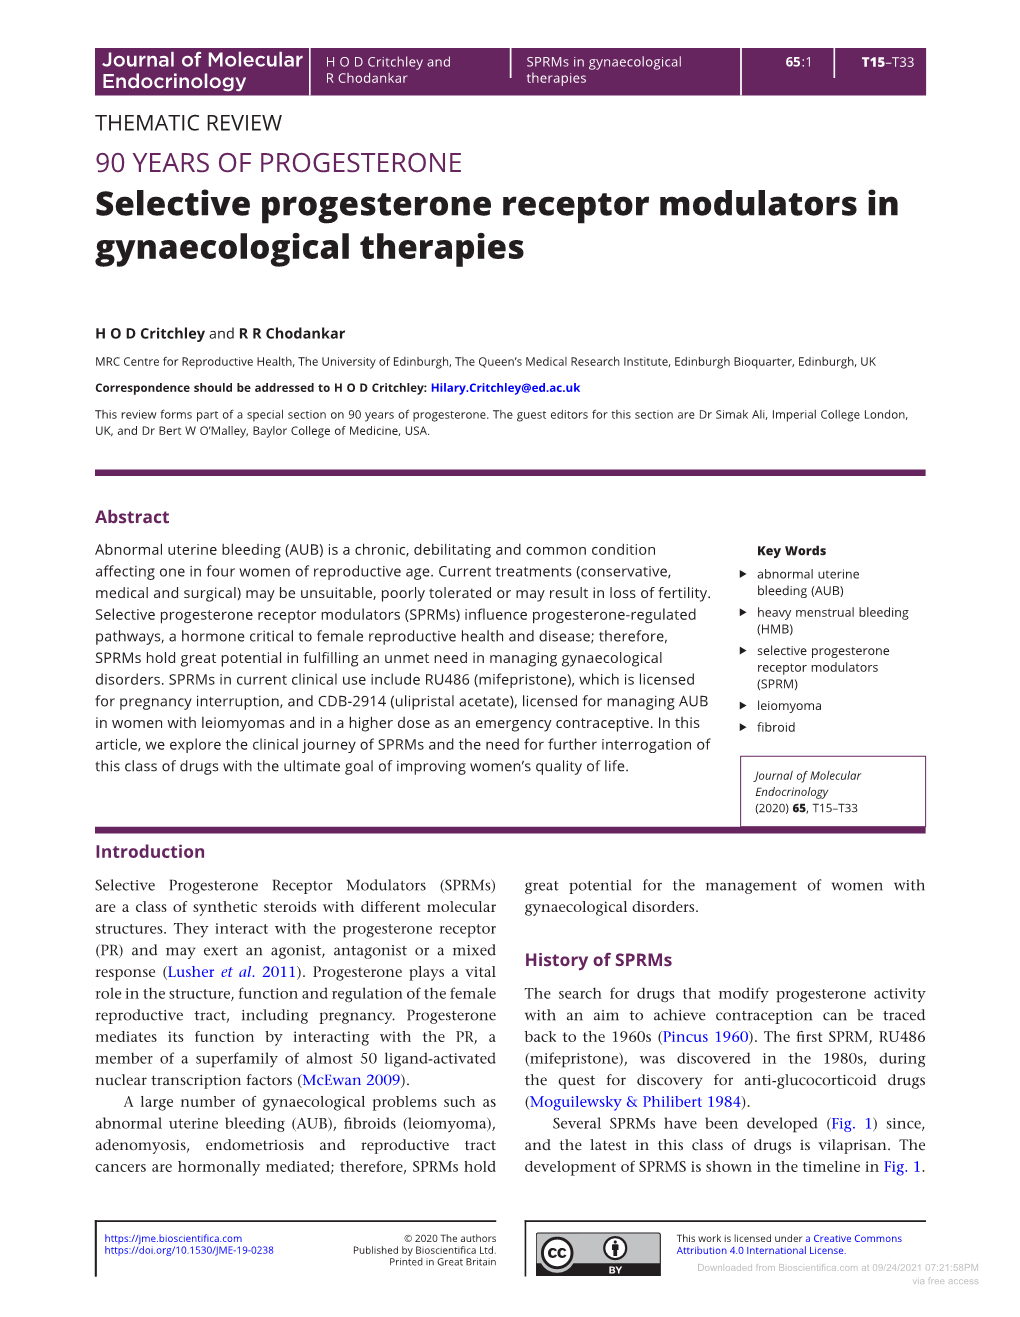 Selective Progesterone Receptor Modulators in Gynaecological Therapies